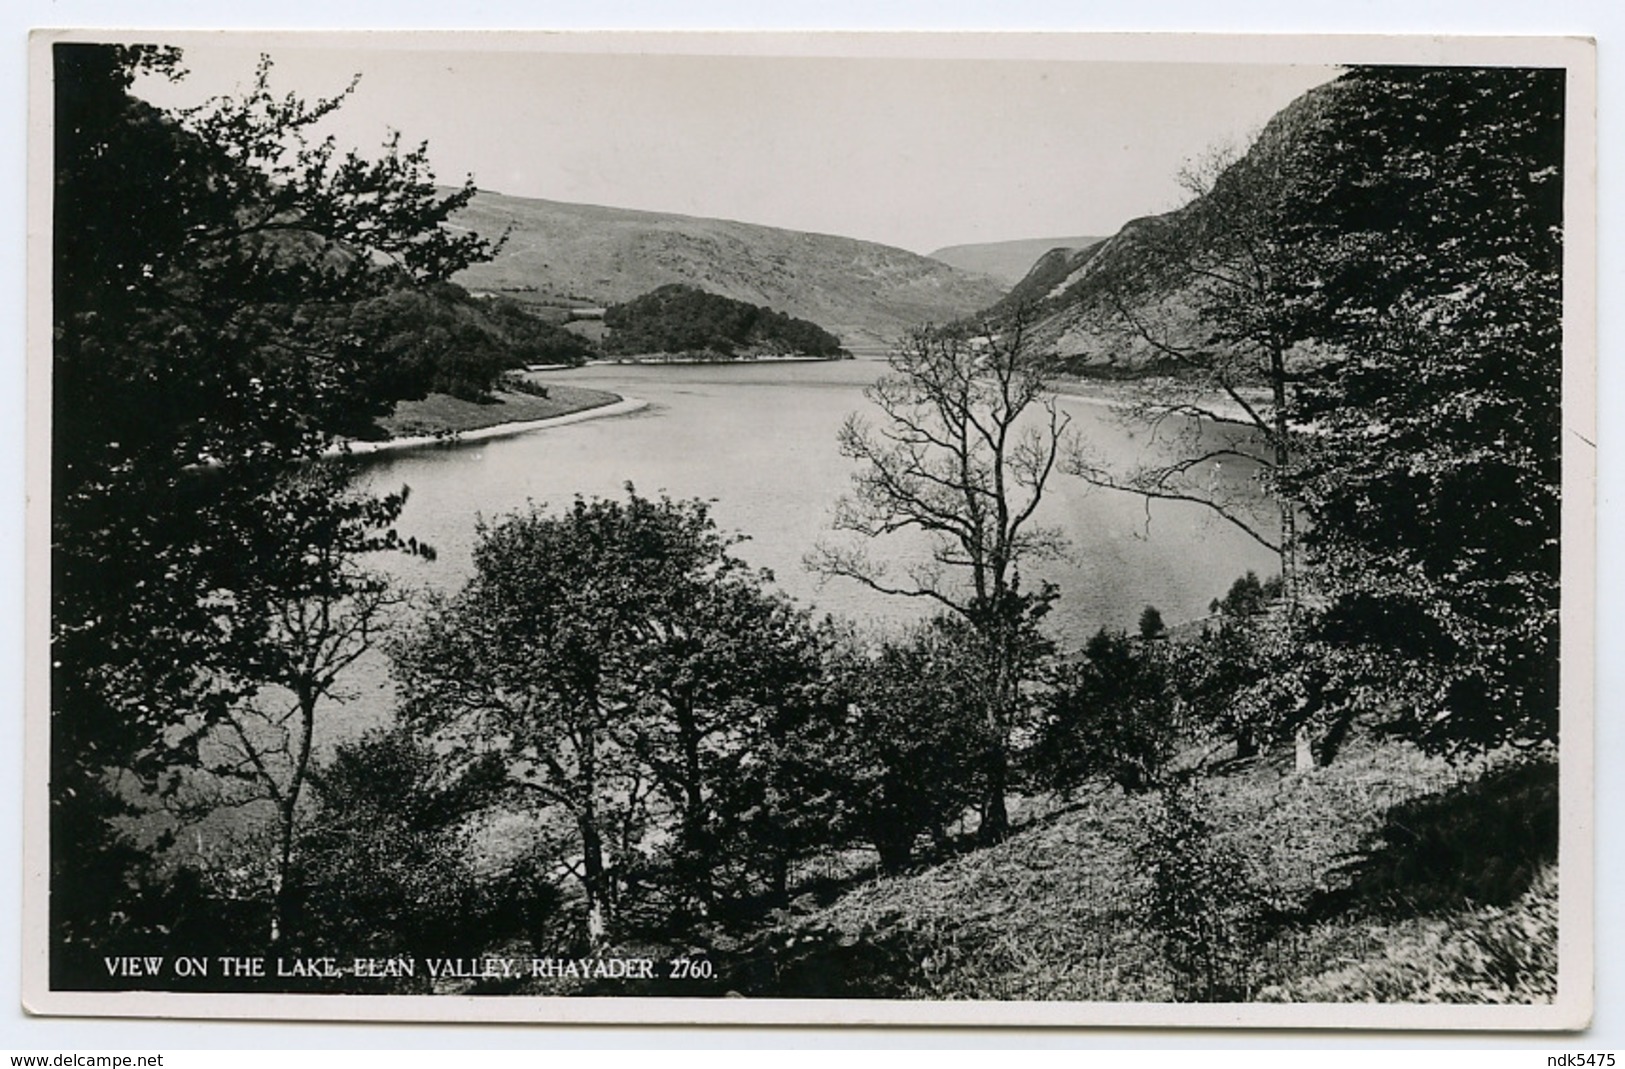 RHAYADER : ELAN VALLEY - VIEW ON THE LAKE / ADDRESS - SWANSEA, SKETTY, DUNRAVEN ROAD (CROLE) - Radnorshire